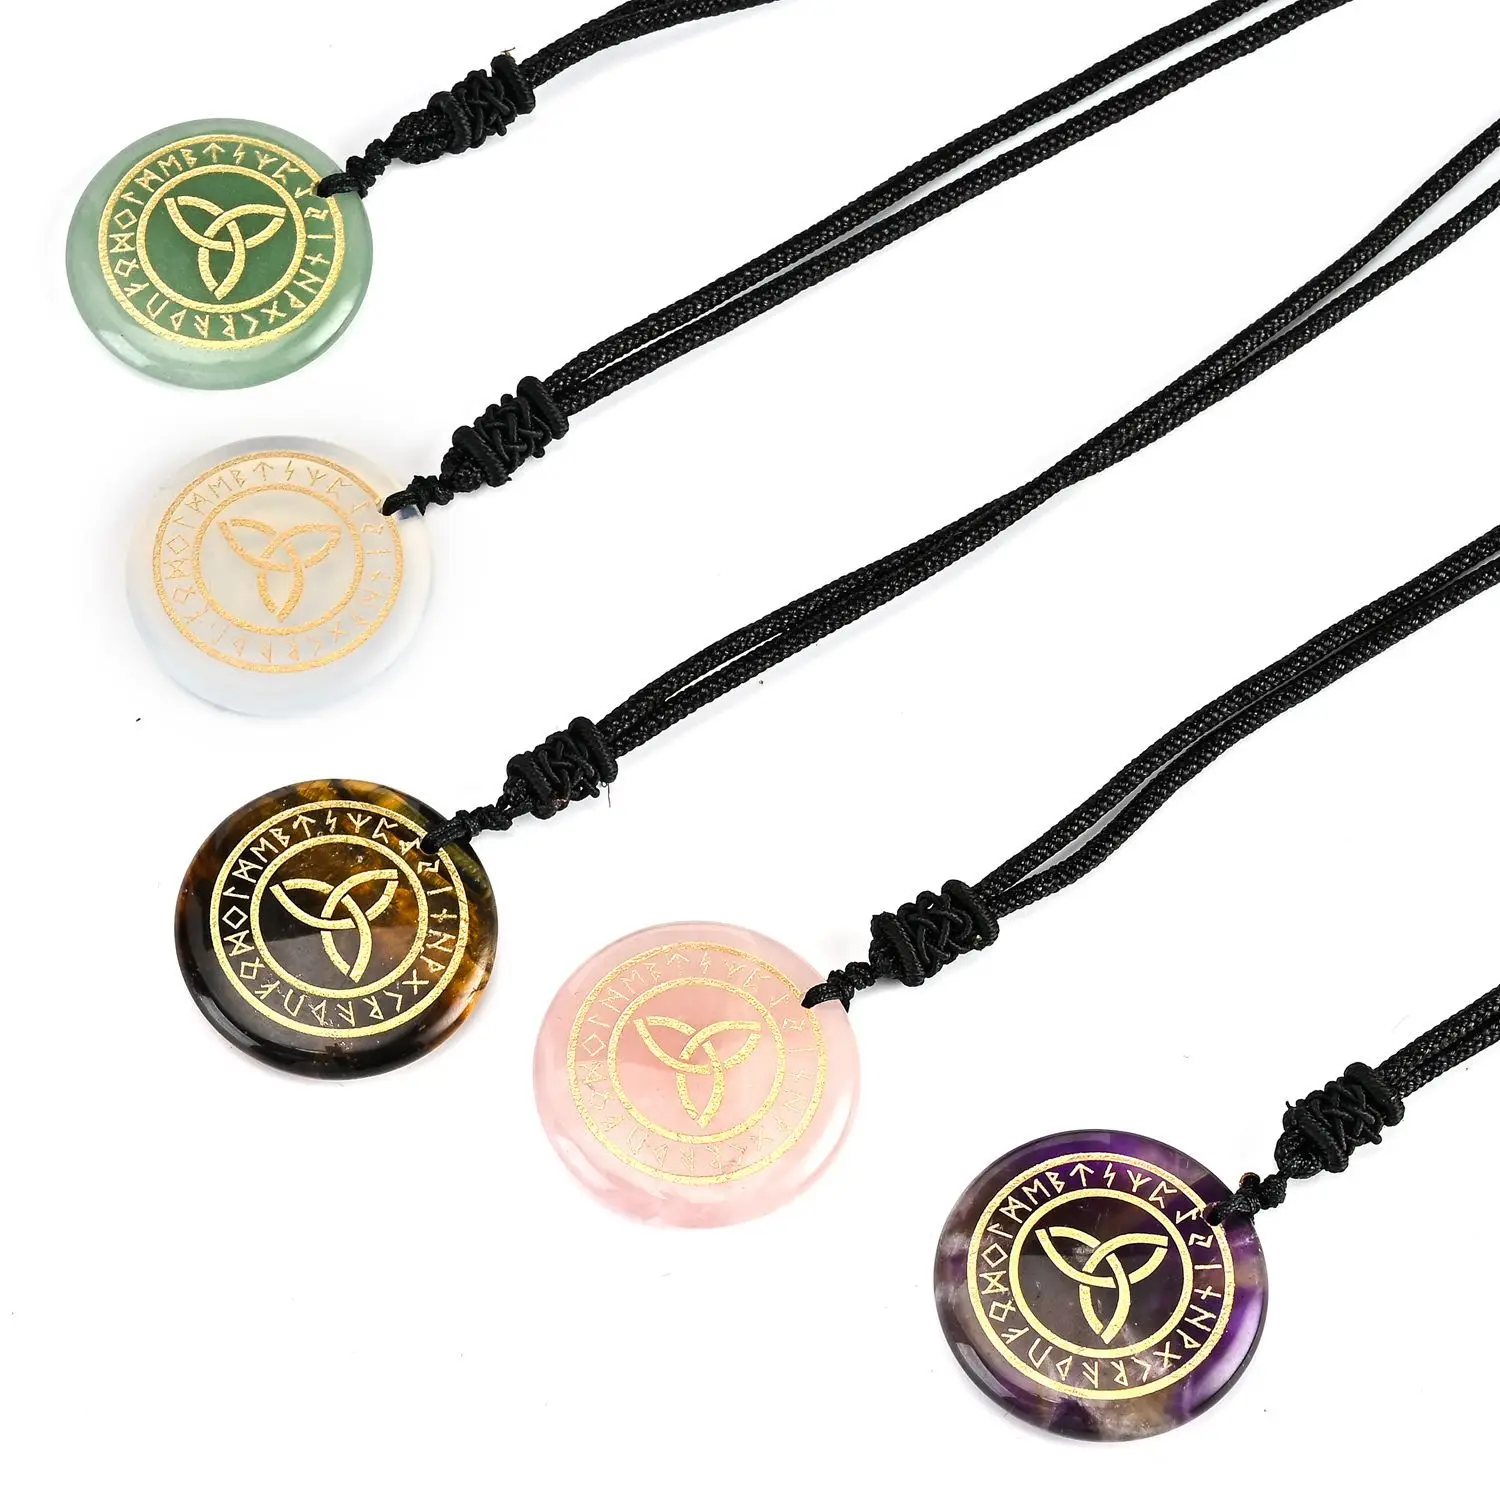 

Natural Stone Engraved Triqueta Knot Necklace Healing Crystal Reiki Runes Pendant Viking Irish Lucky Amulet Charms for Women